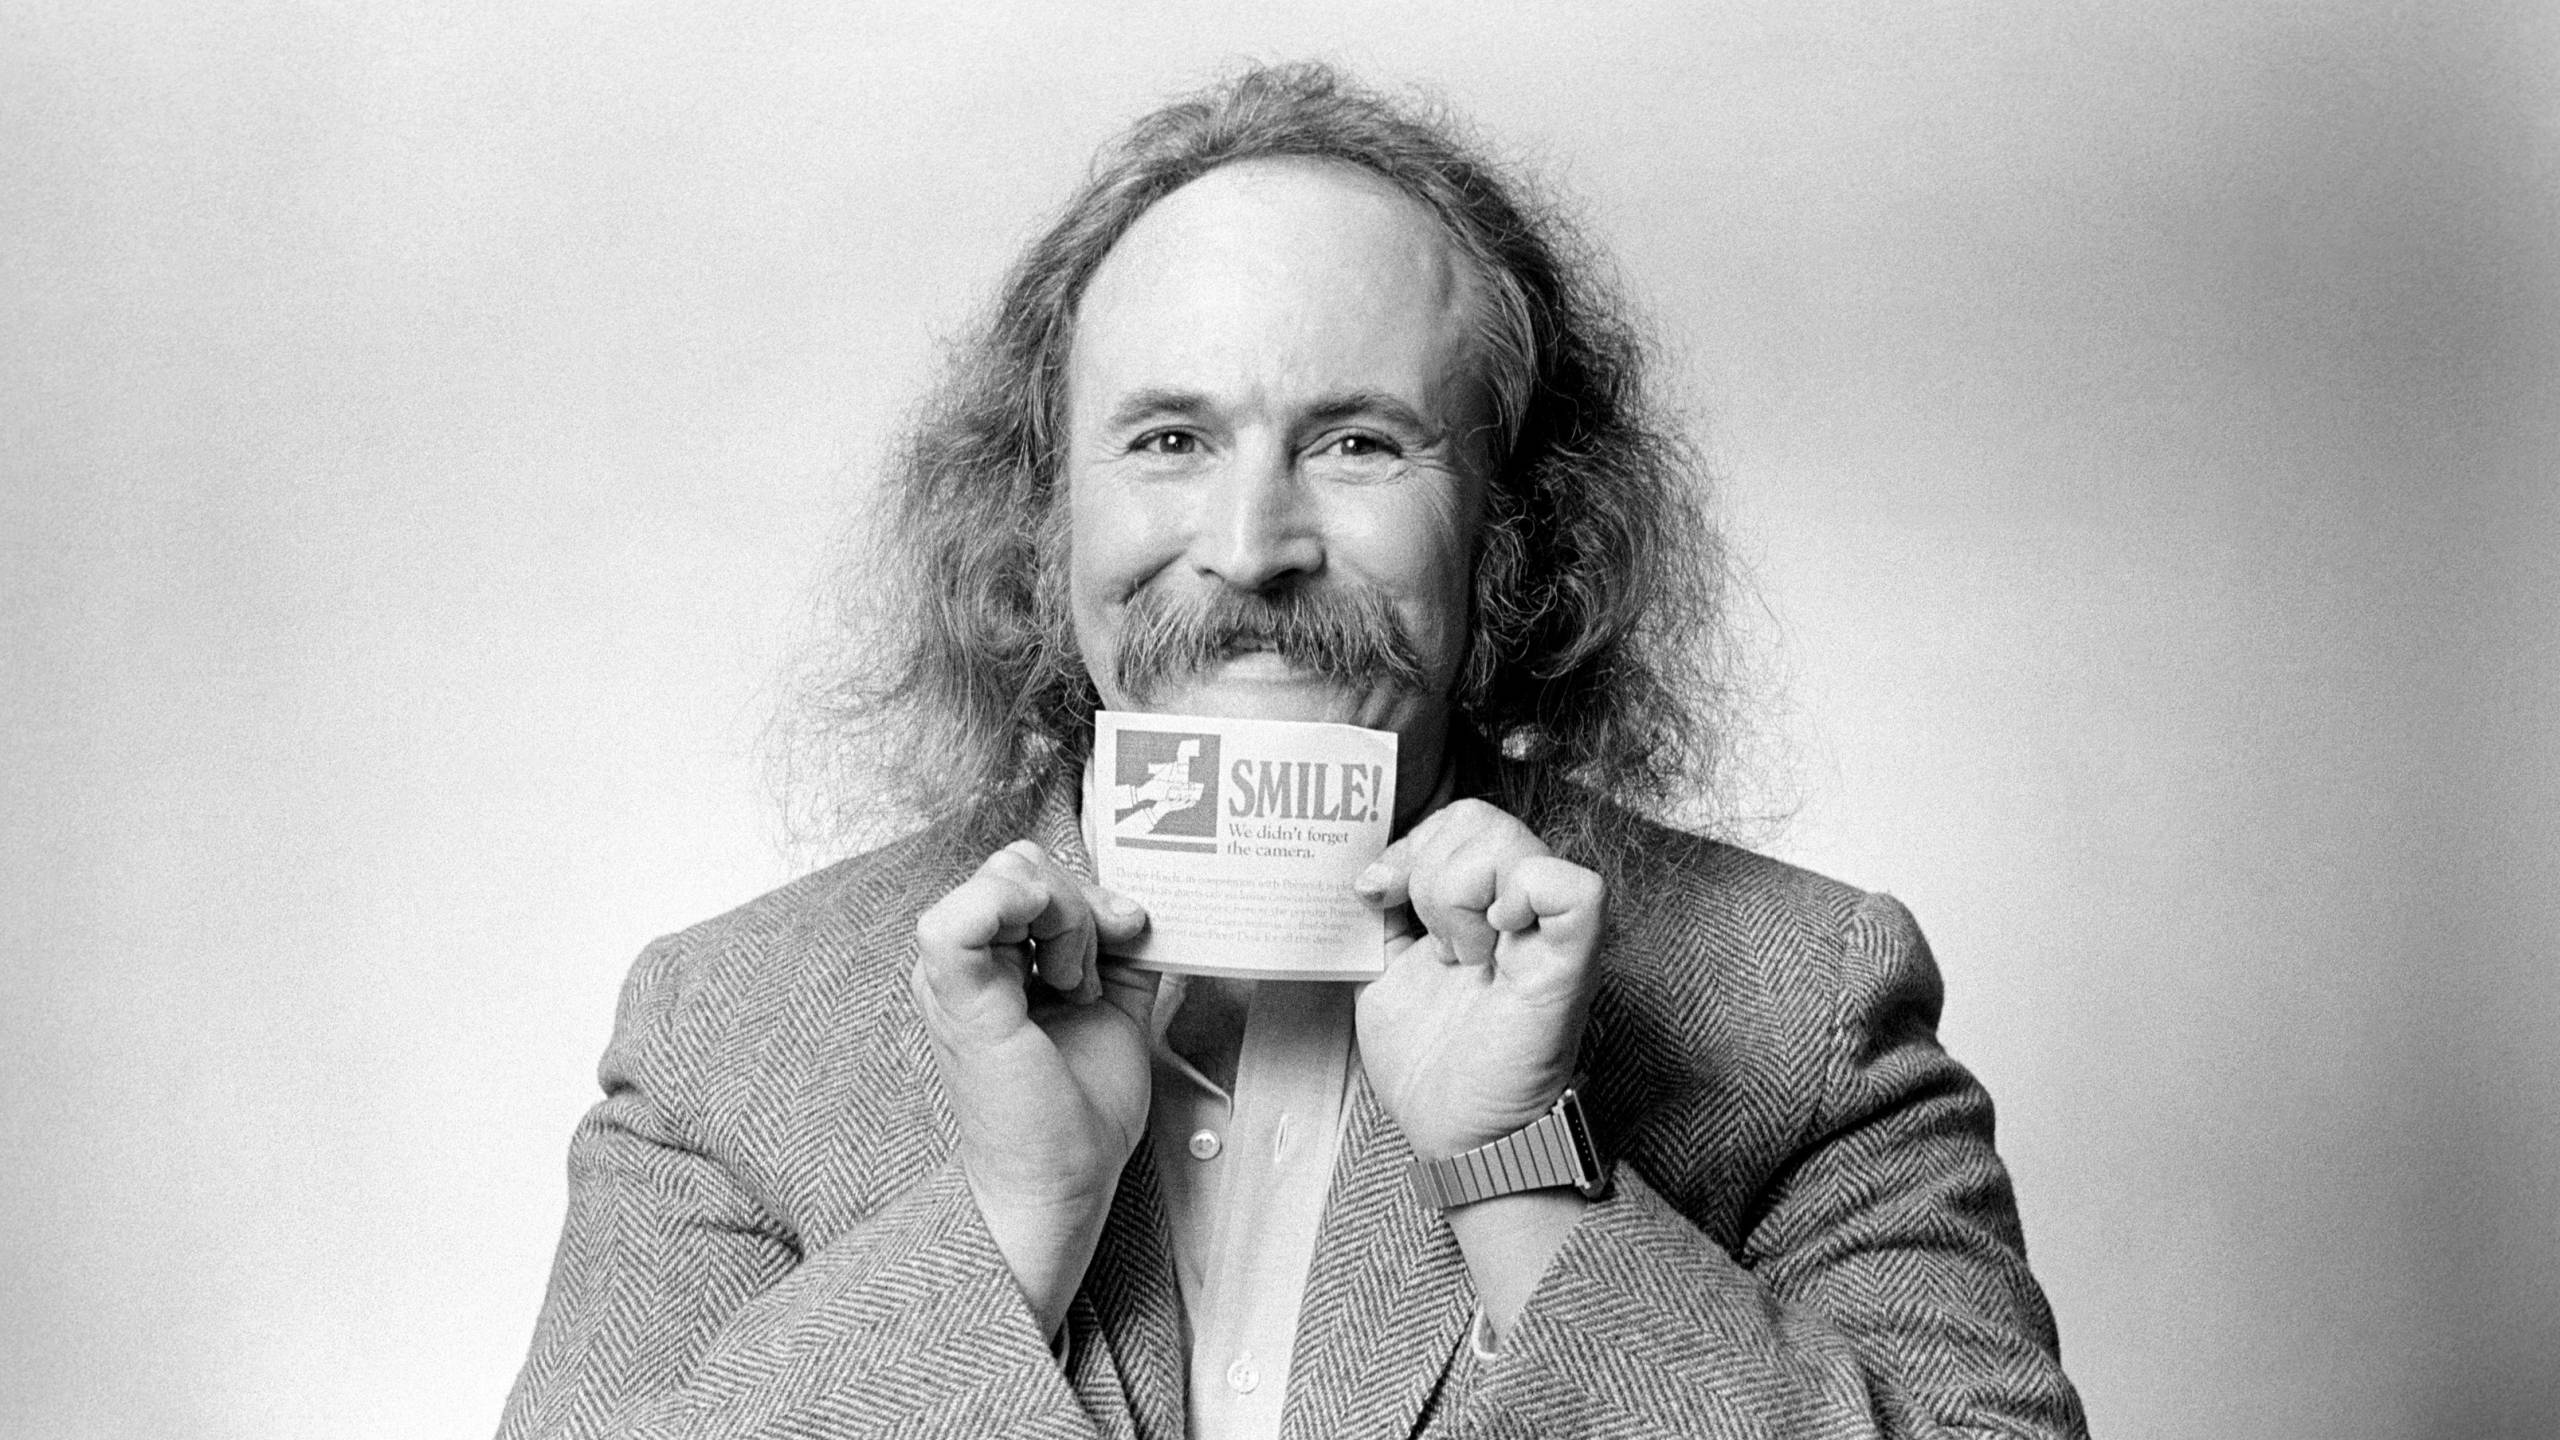 Black and white photo of man with mustache holding a card that says  "smile" below his smiling mouth